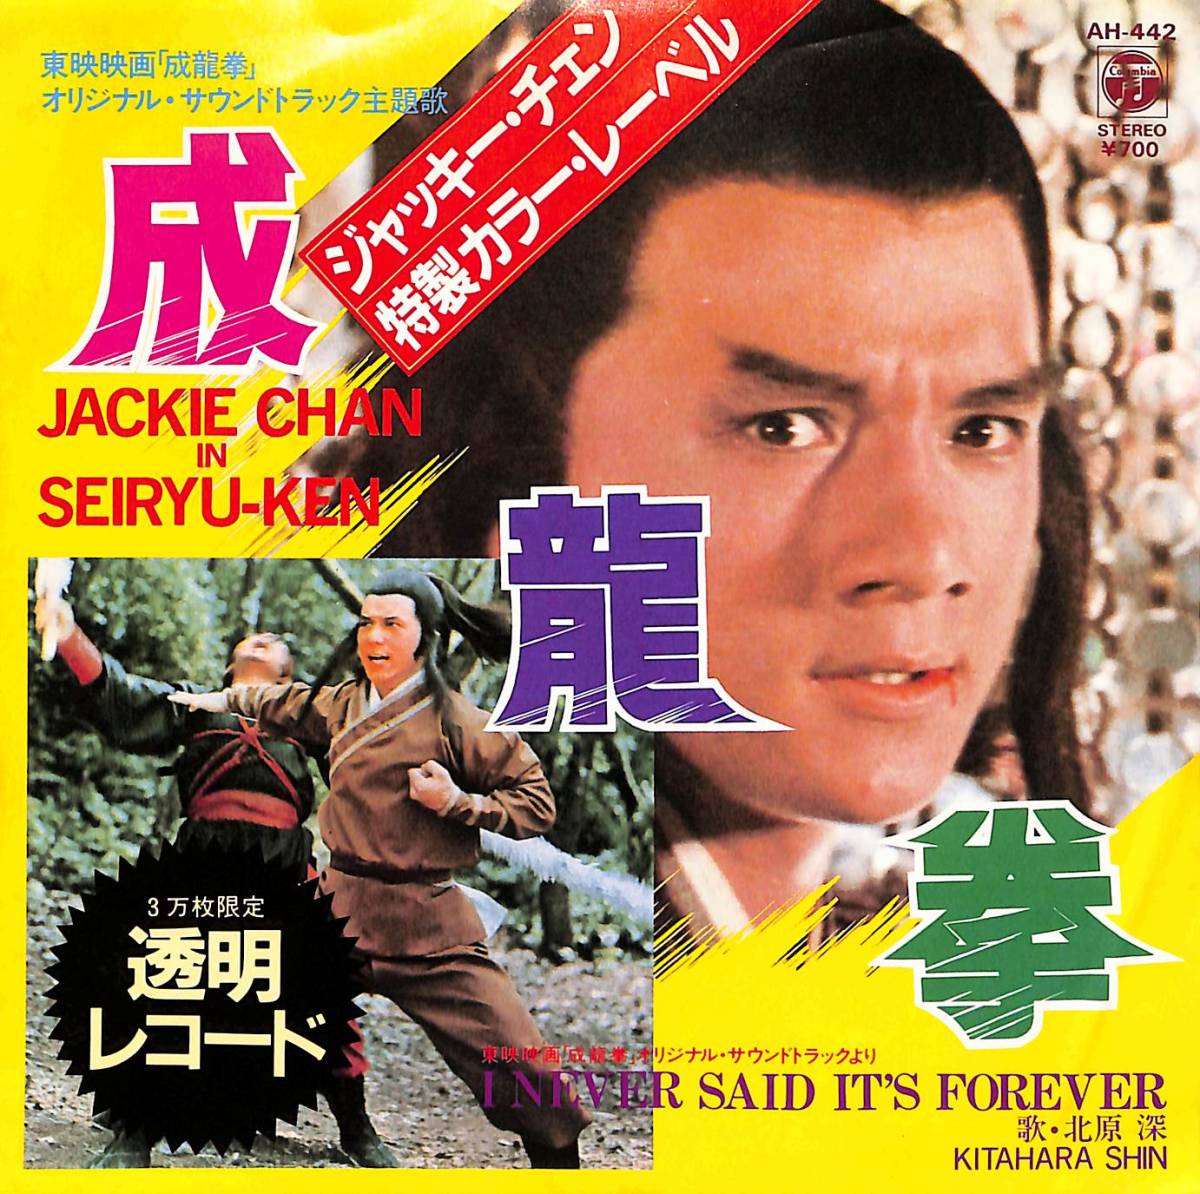 C00191204/EP/北原深(歌)/ジャッキー・チェン(表紙)「成龍拳 To Kill With Intrigue / I Never Said Its Forever (1984年・AH-442・サン_画像1